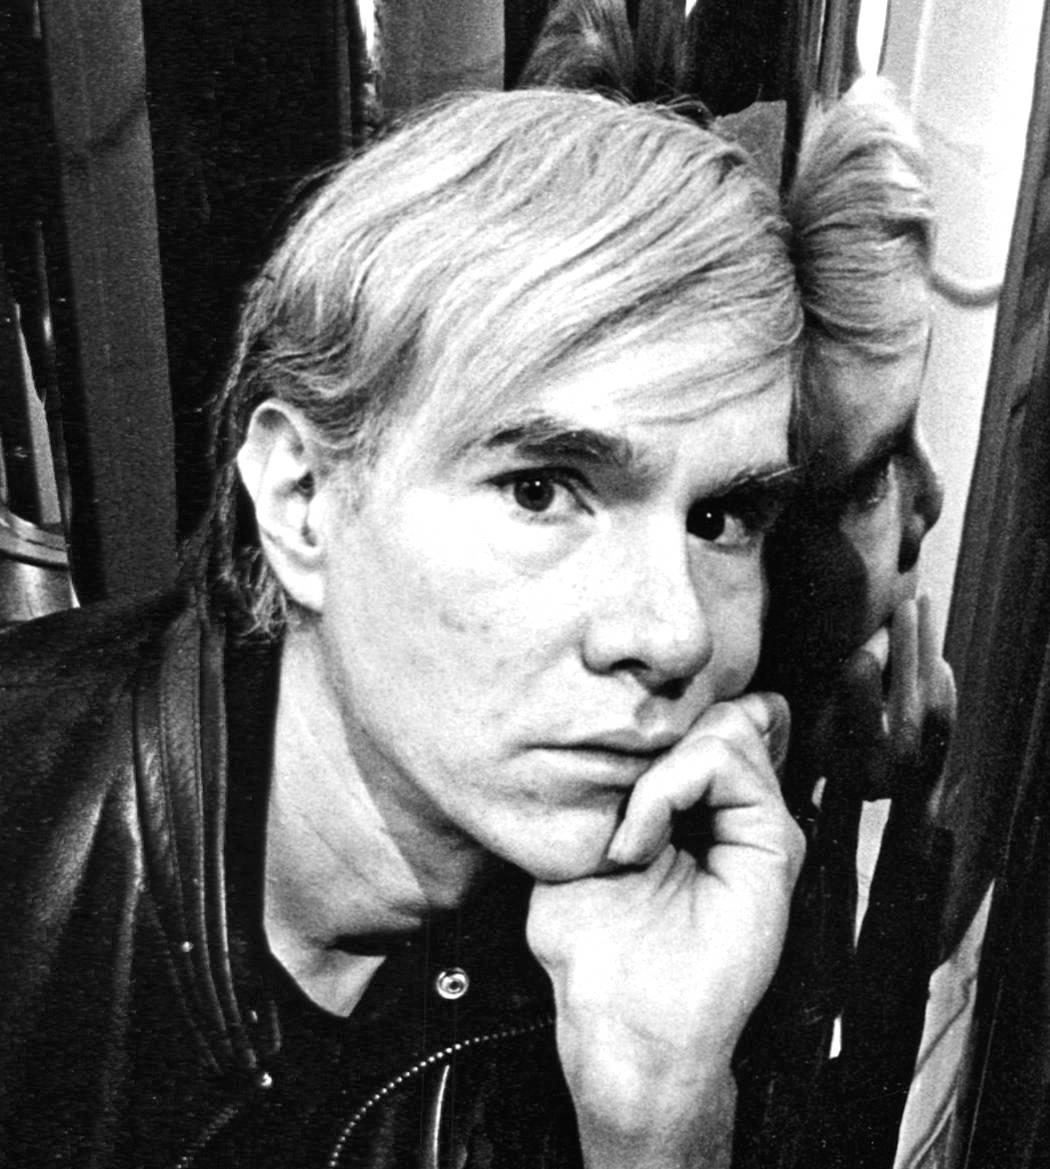 Andy Warhol at his Union Square Factory Estate Edition Jack Mitchell Photograph 1